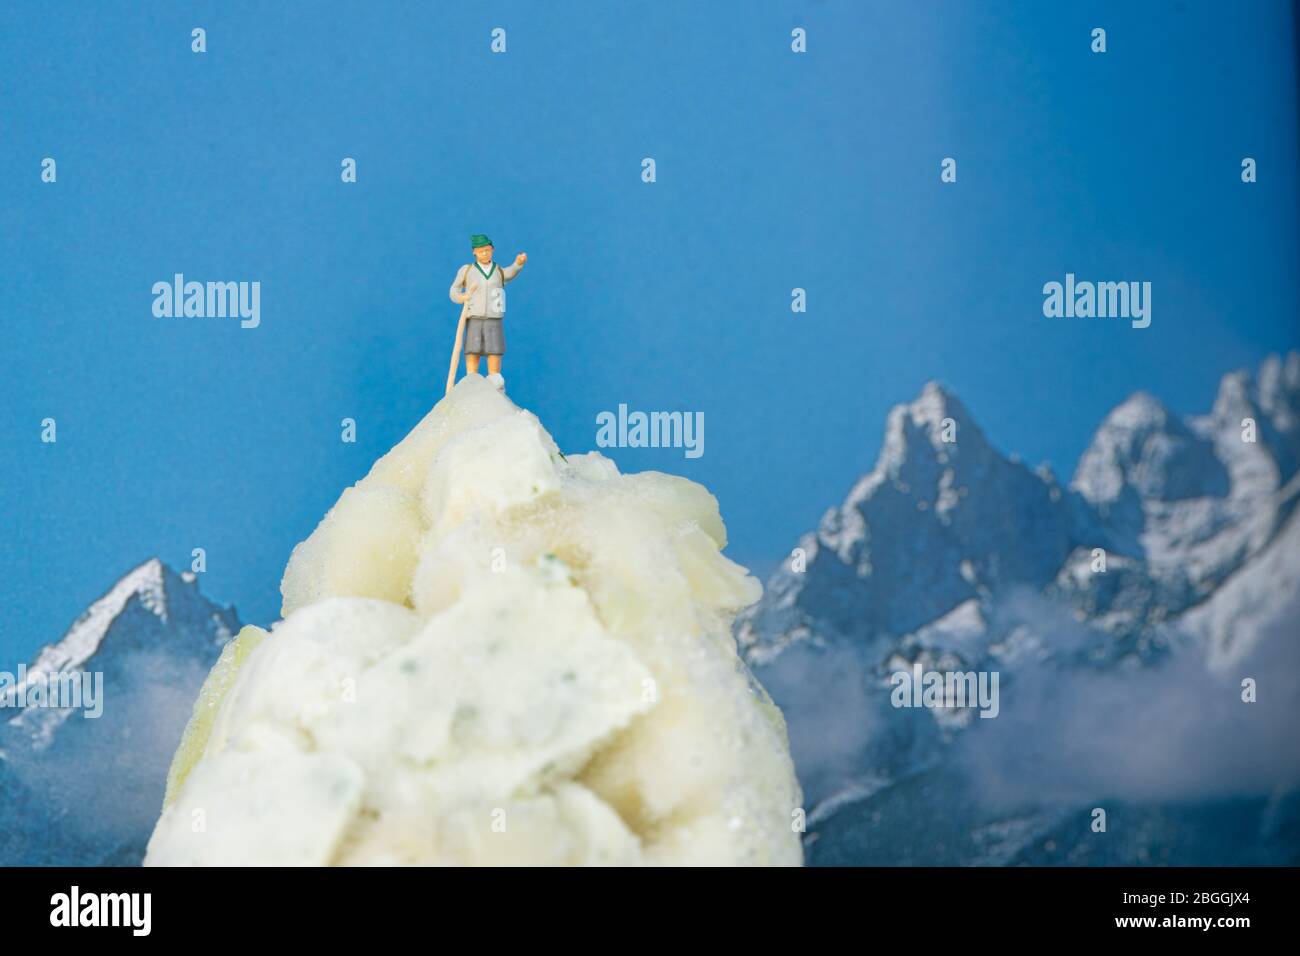 Little grandma in a folk costume has climbed the peak of a mountain of frozen cabbage Stock Photo